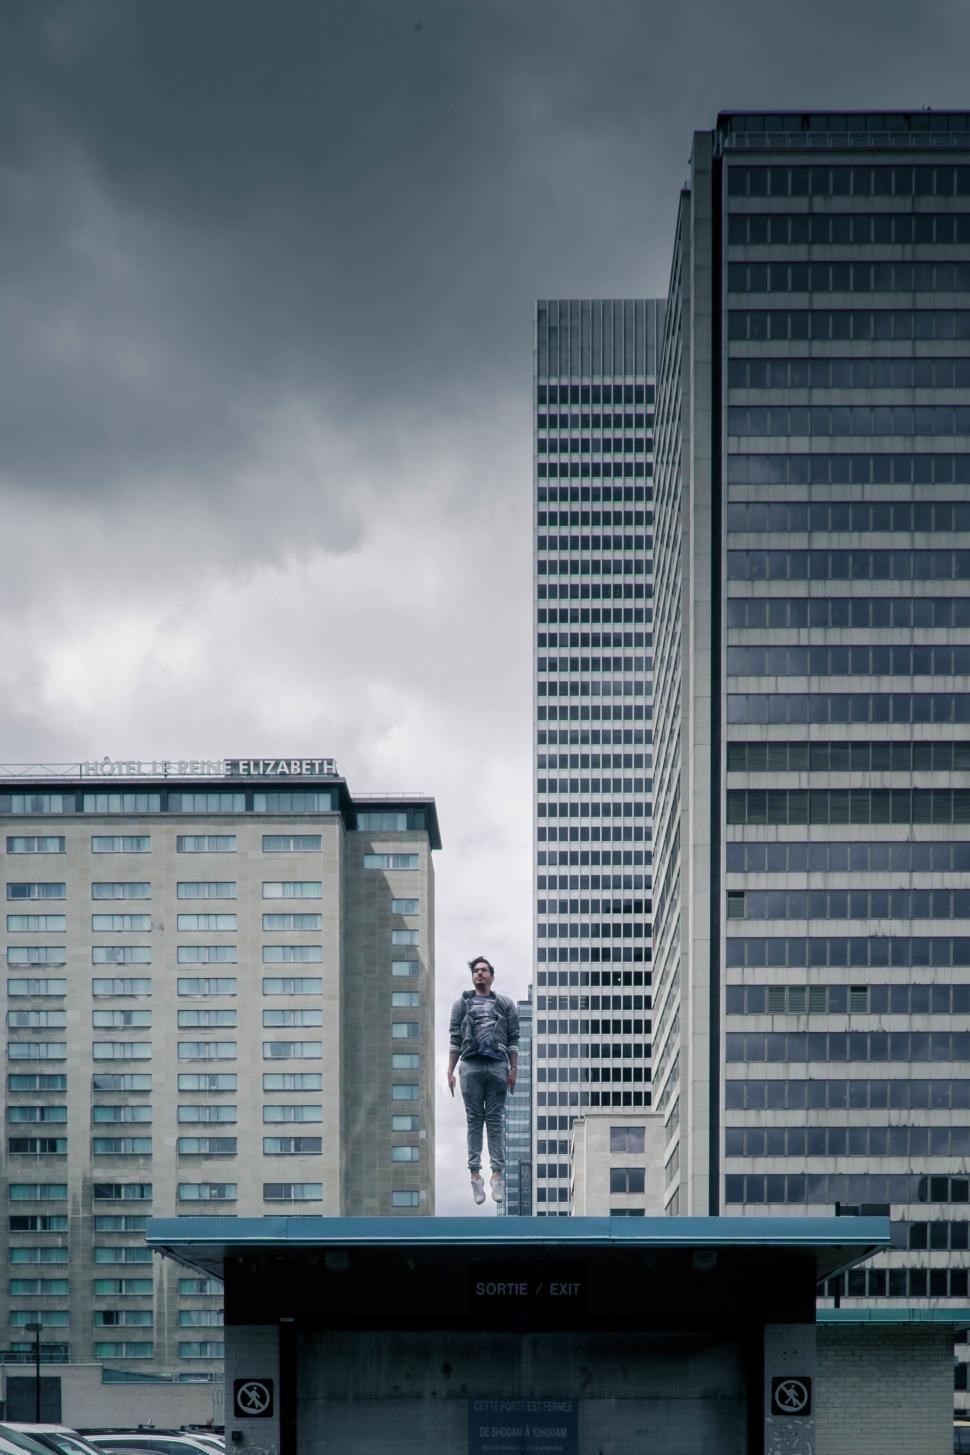 Free Image of Man Standing on Roof in Urban Setting 